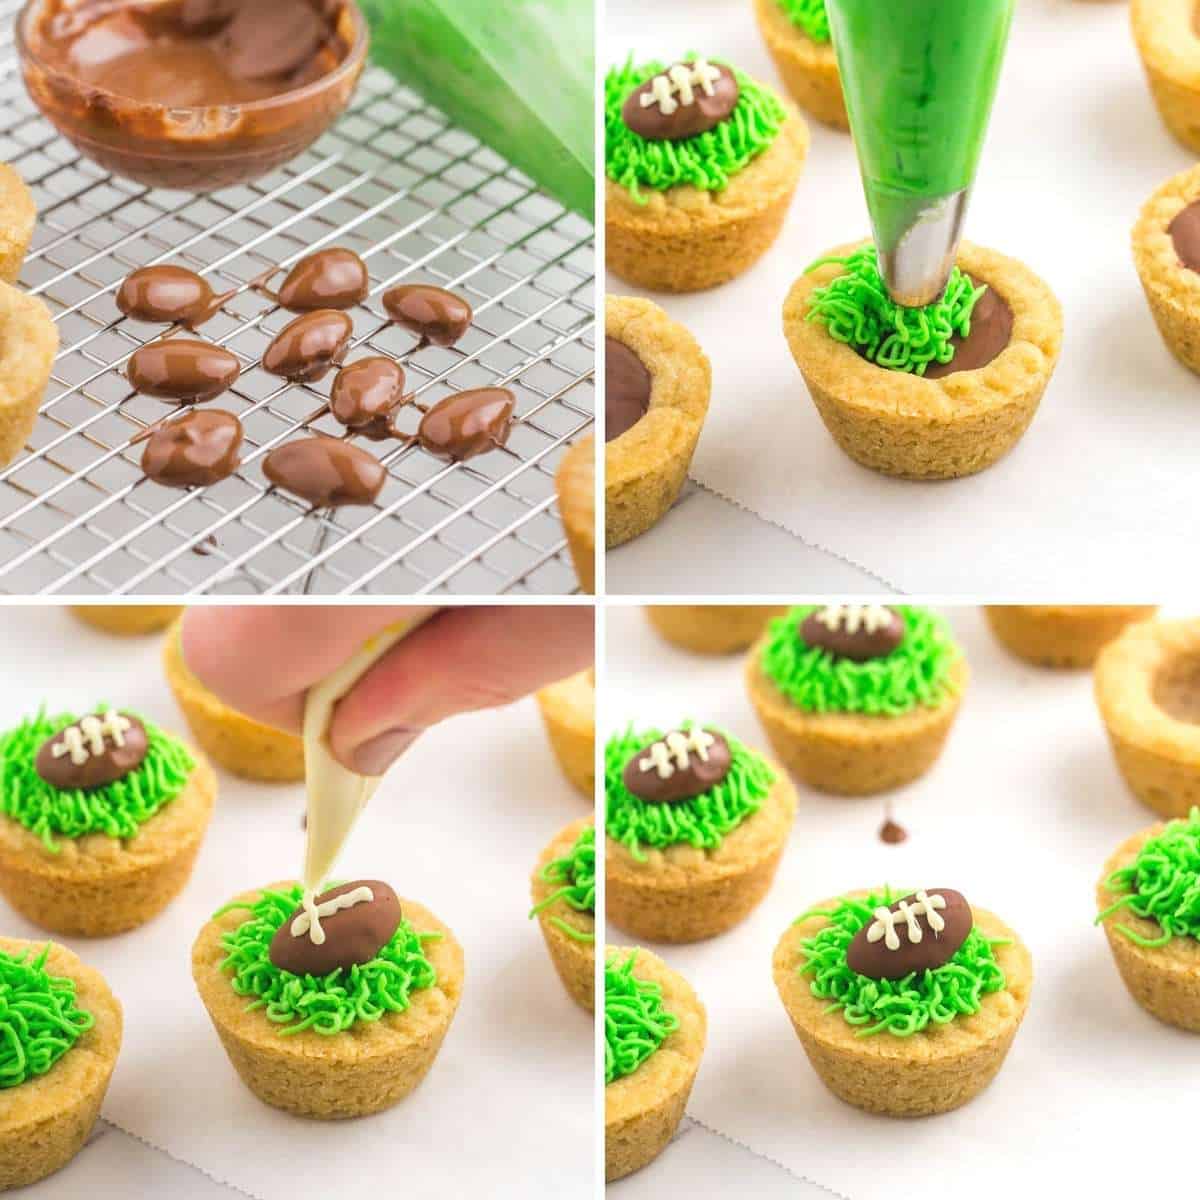 Collage of four images showing how to make chocolate almonds, then pipe the buttercream grass on the cookie cups and decorate the chocolate almonds with white stripes to create footballs.